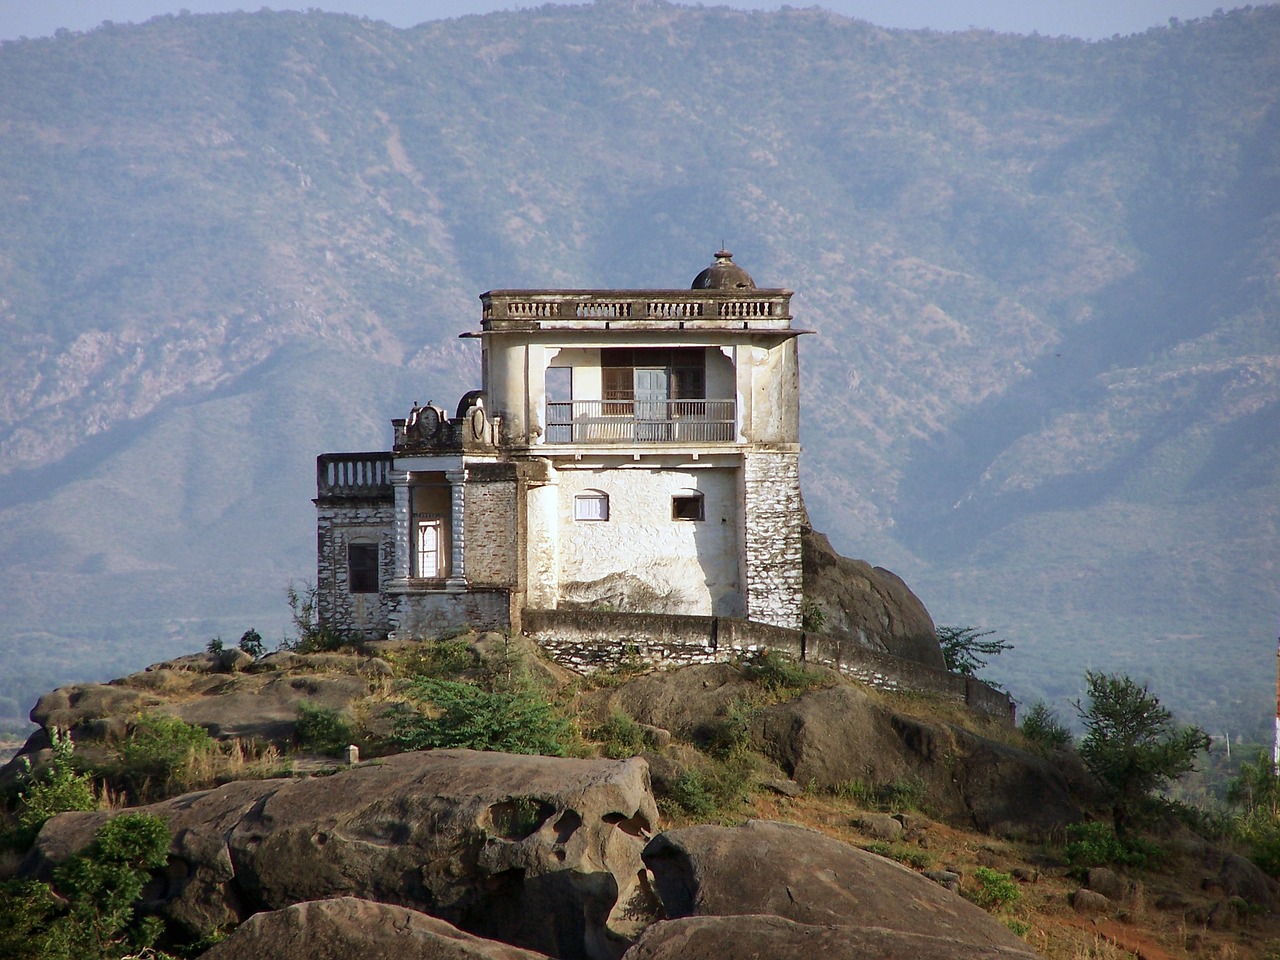 3 Days of Nature and History in Mount Abu